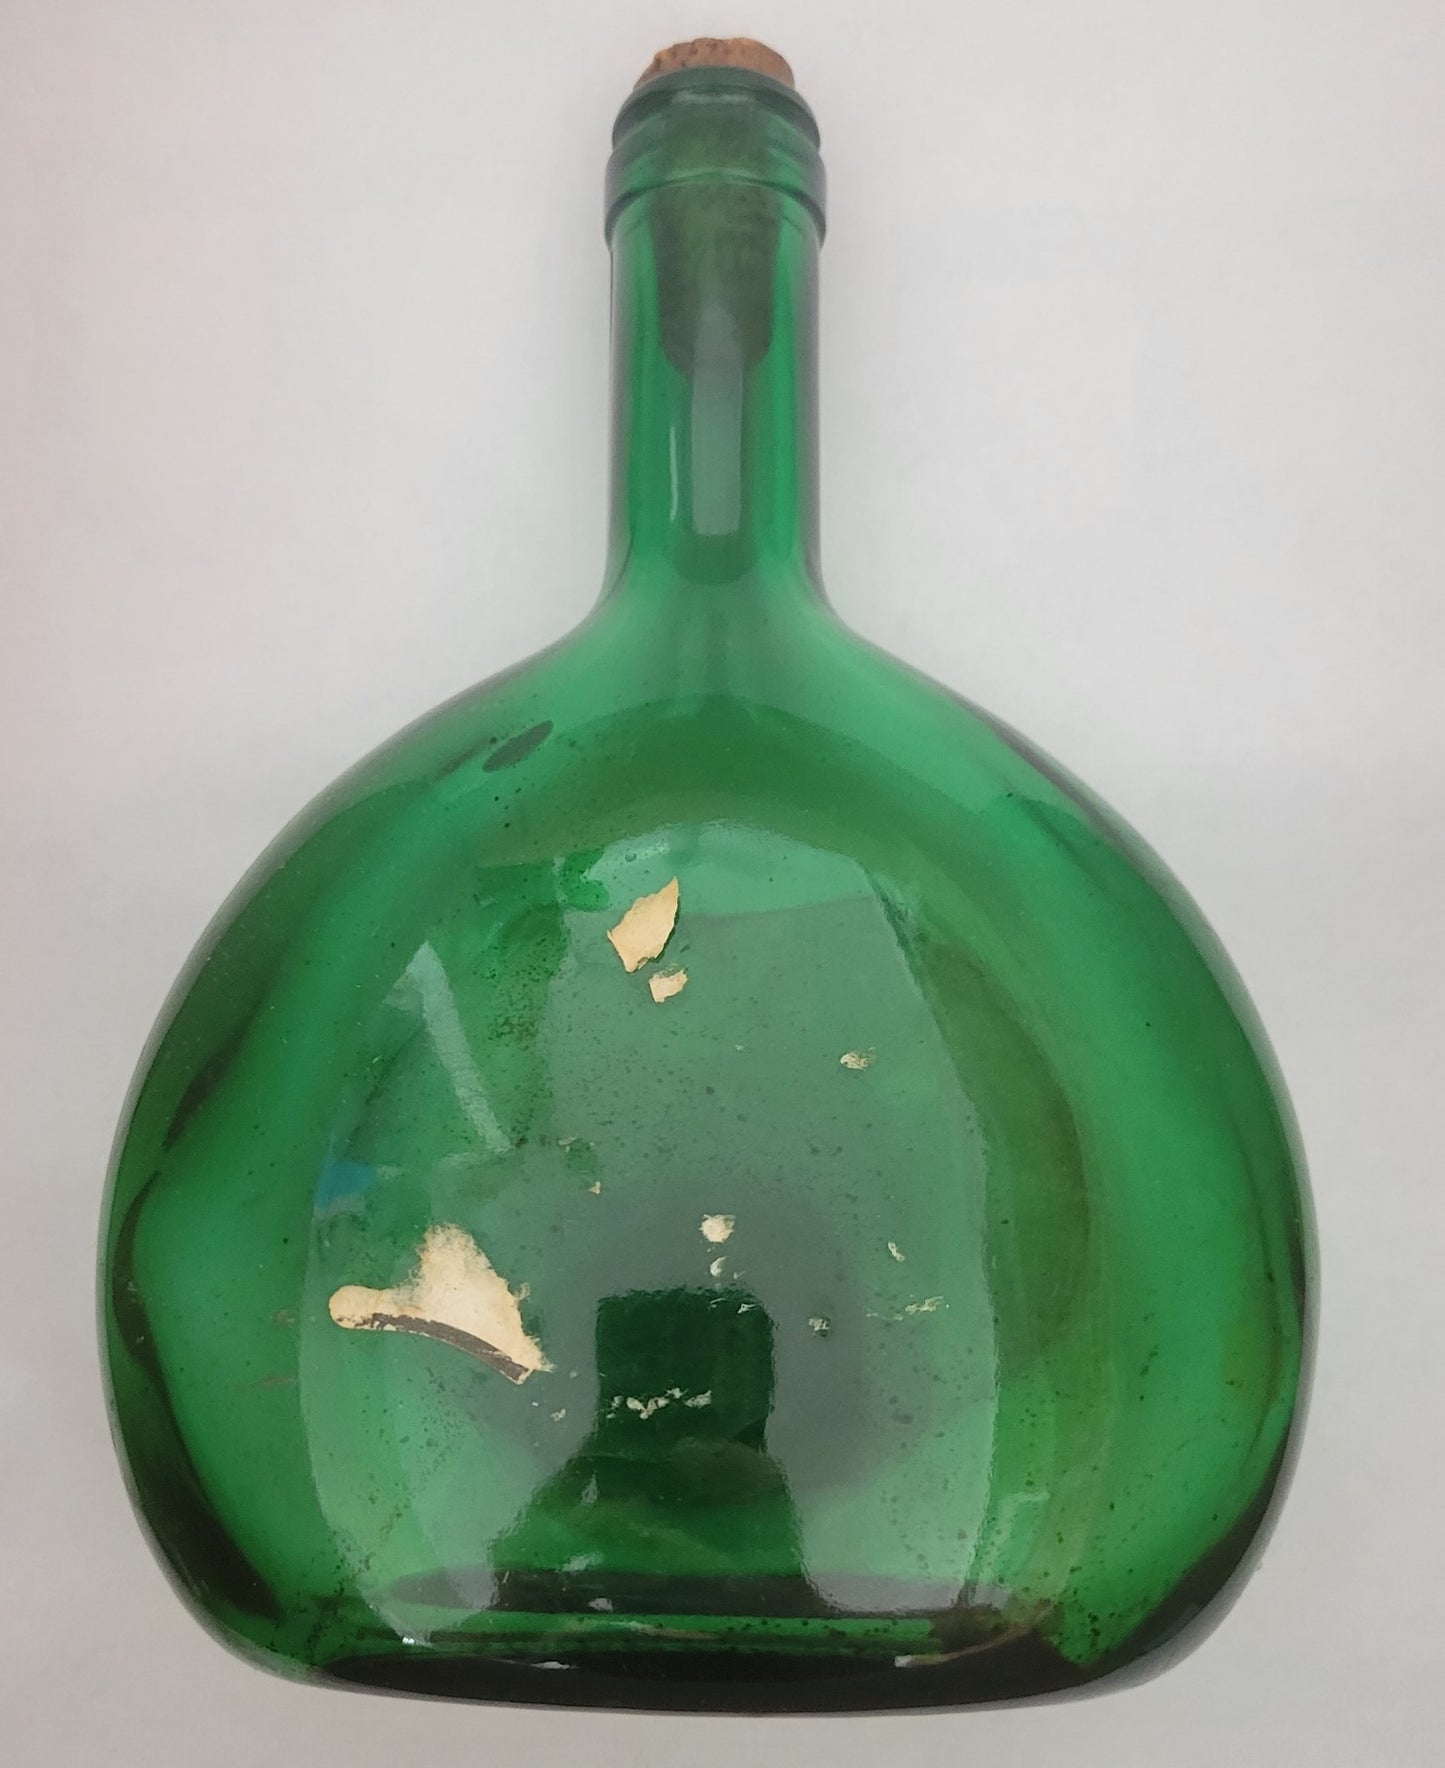 Vintage Rose Still wine bottle by Mateus, made in Portugal. Back view.